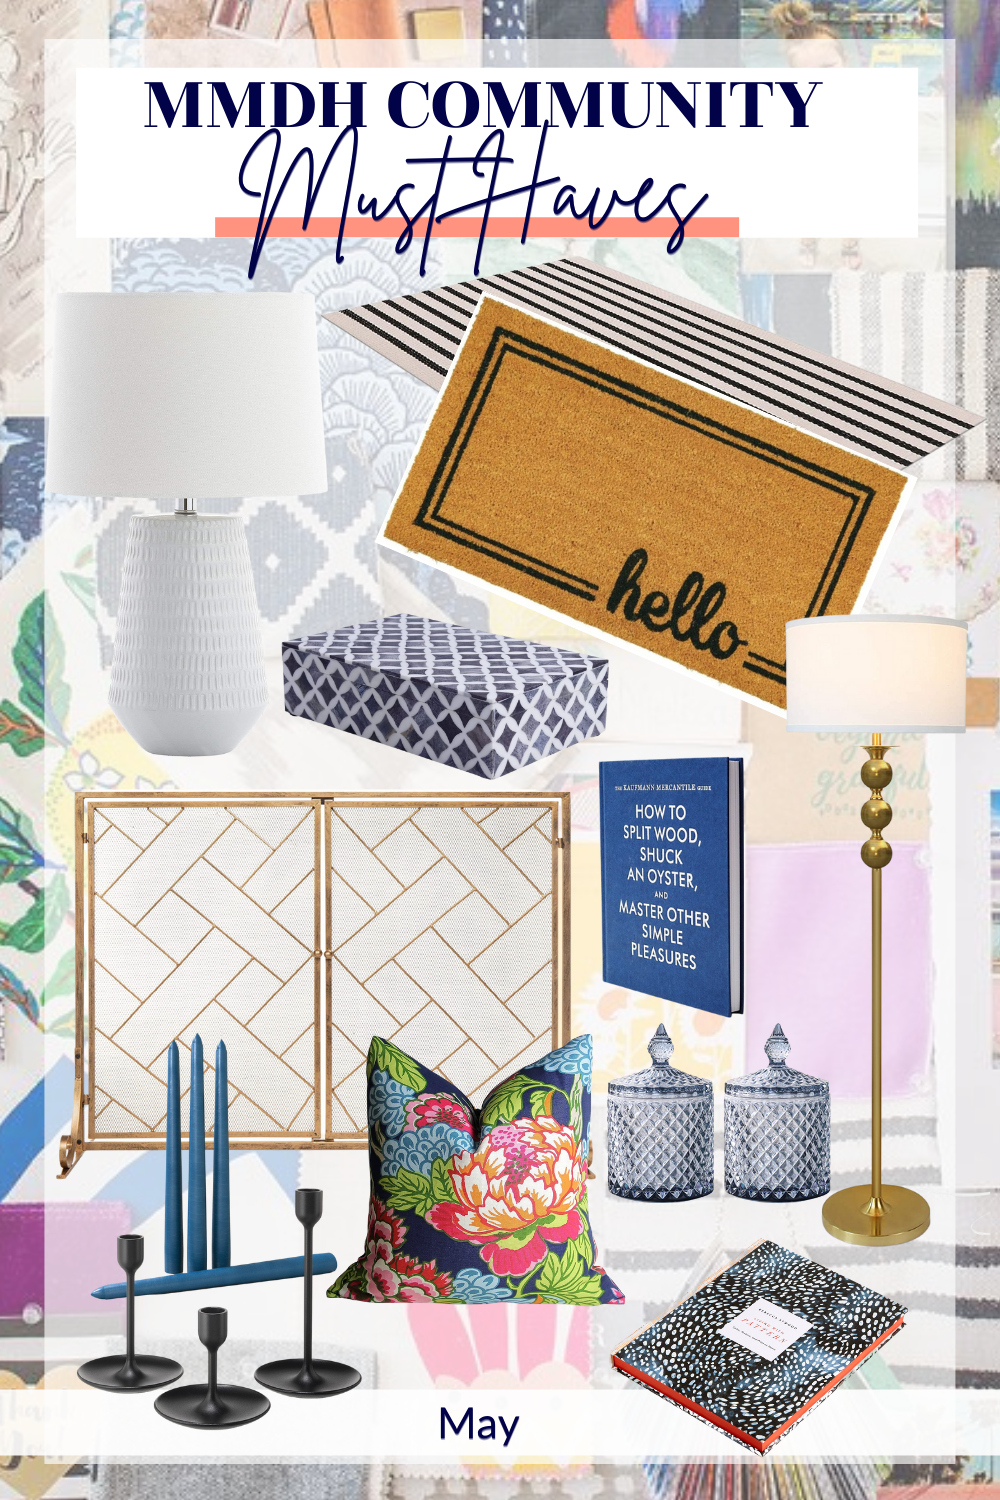 this is a collage of images from Amazon. There are is a white lamp, stripped entryway rug, a door mat that says hello, a jewelry box, a box, a geometric patterned fireplace cover, a colorful floral pillow, black candle sticks, and blue candles